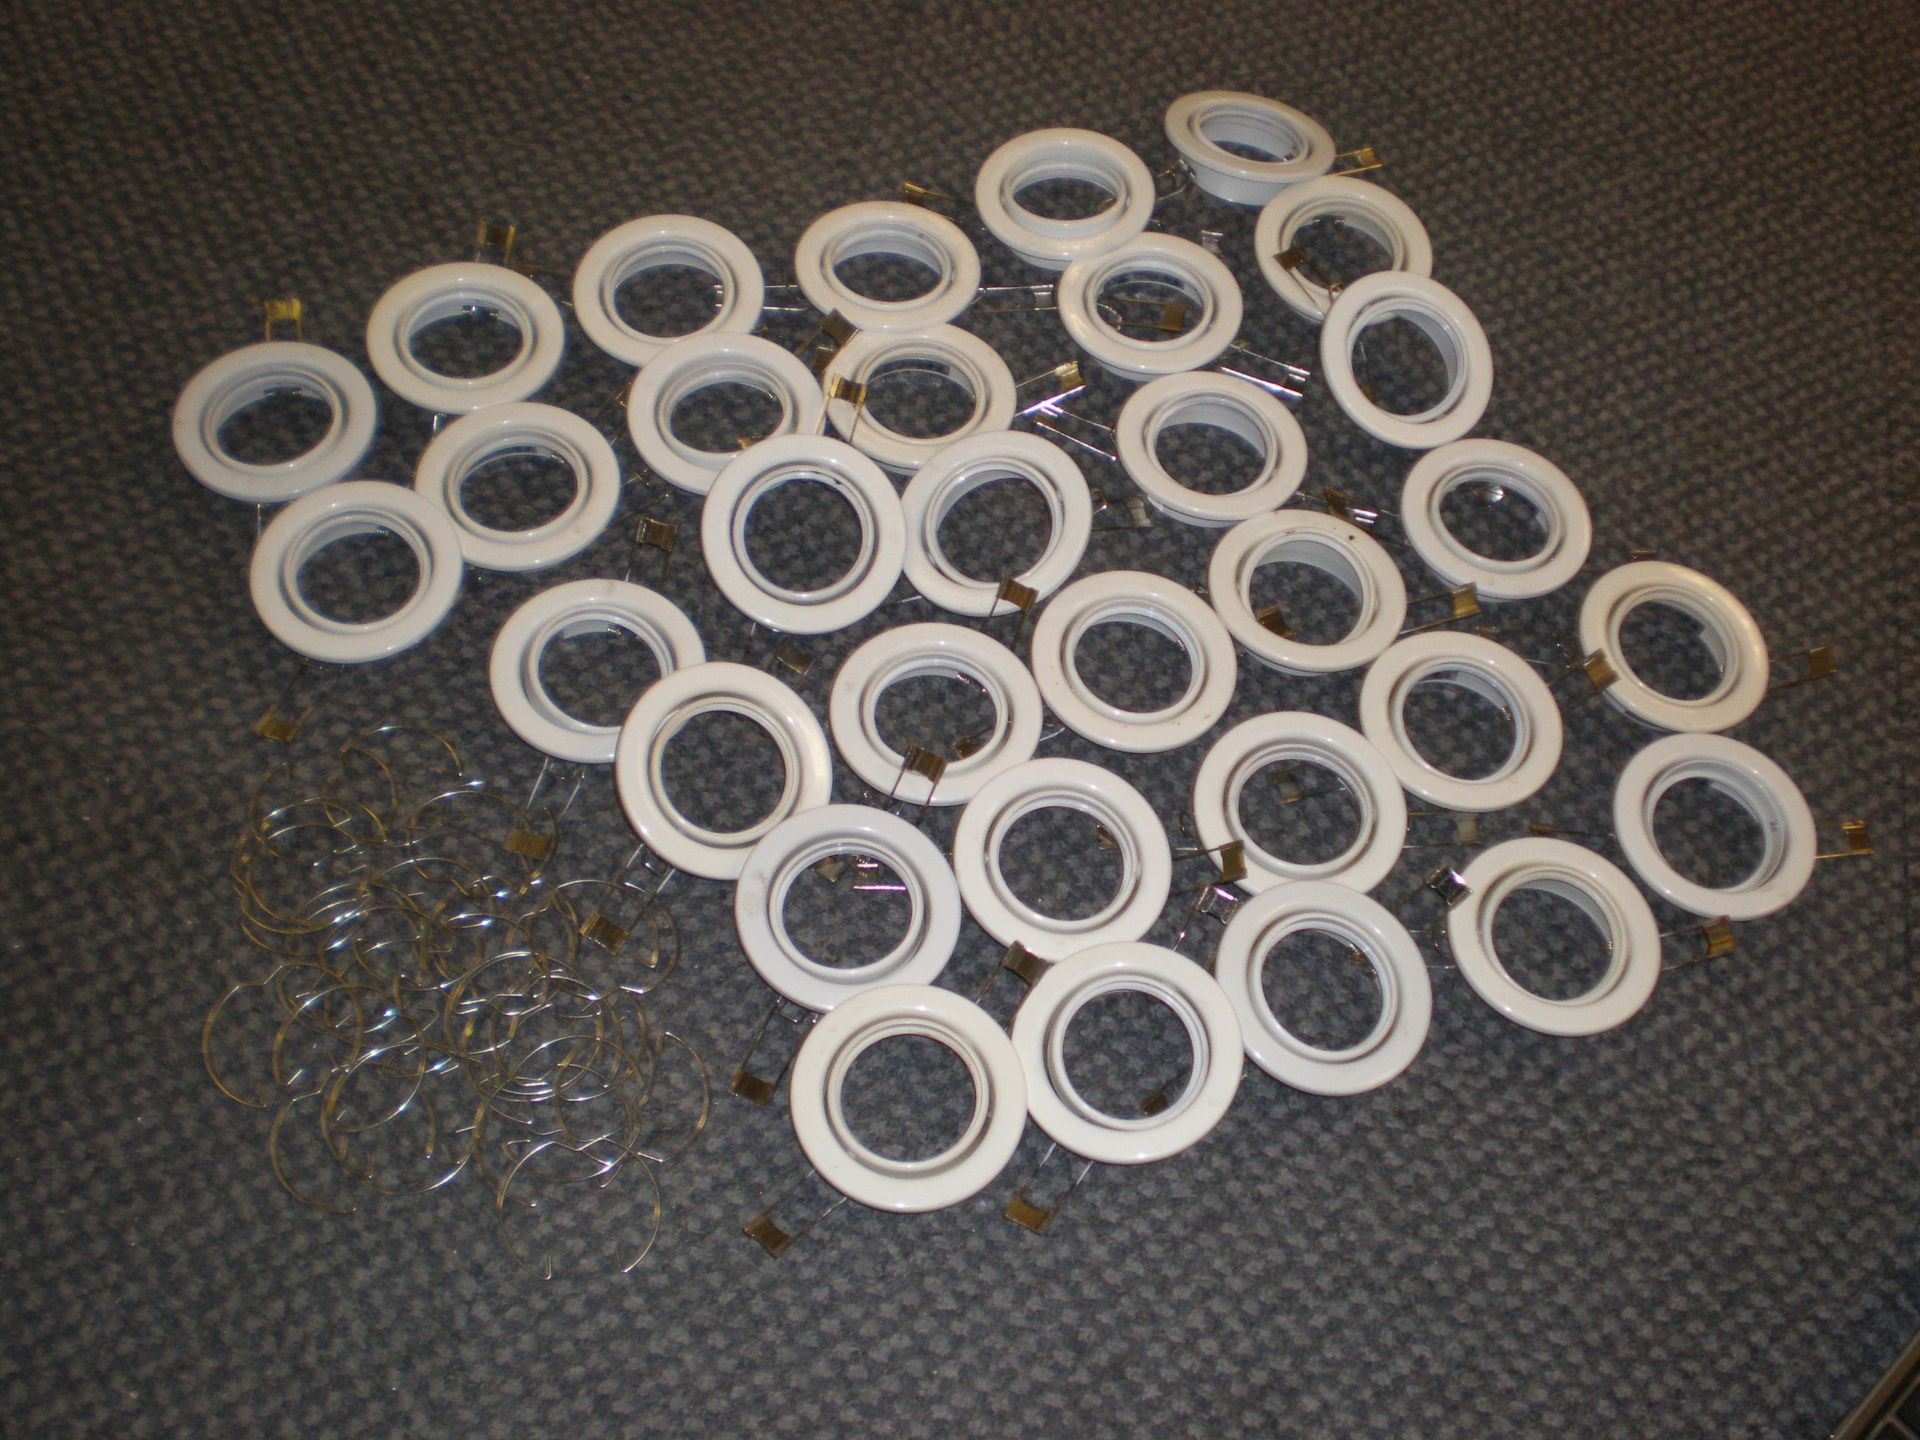 Job Lot Of 32 White Swivel Downlighters For Max 50W Lamps Compatable With Gu10 Or Mr16 Lamps